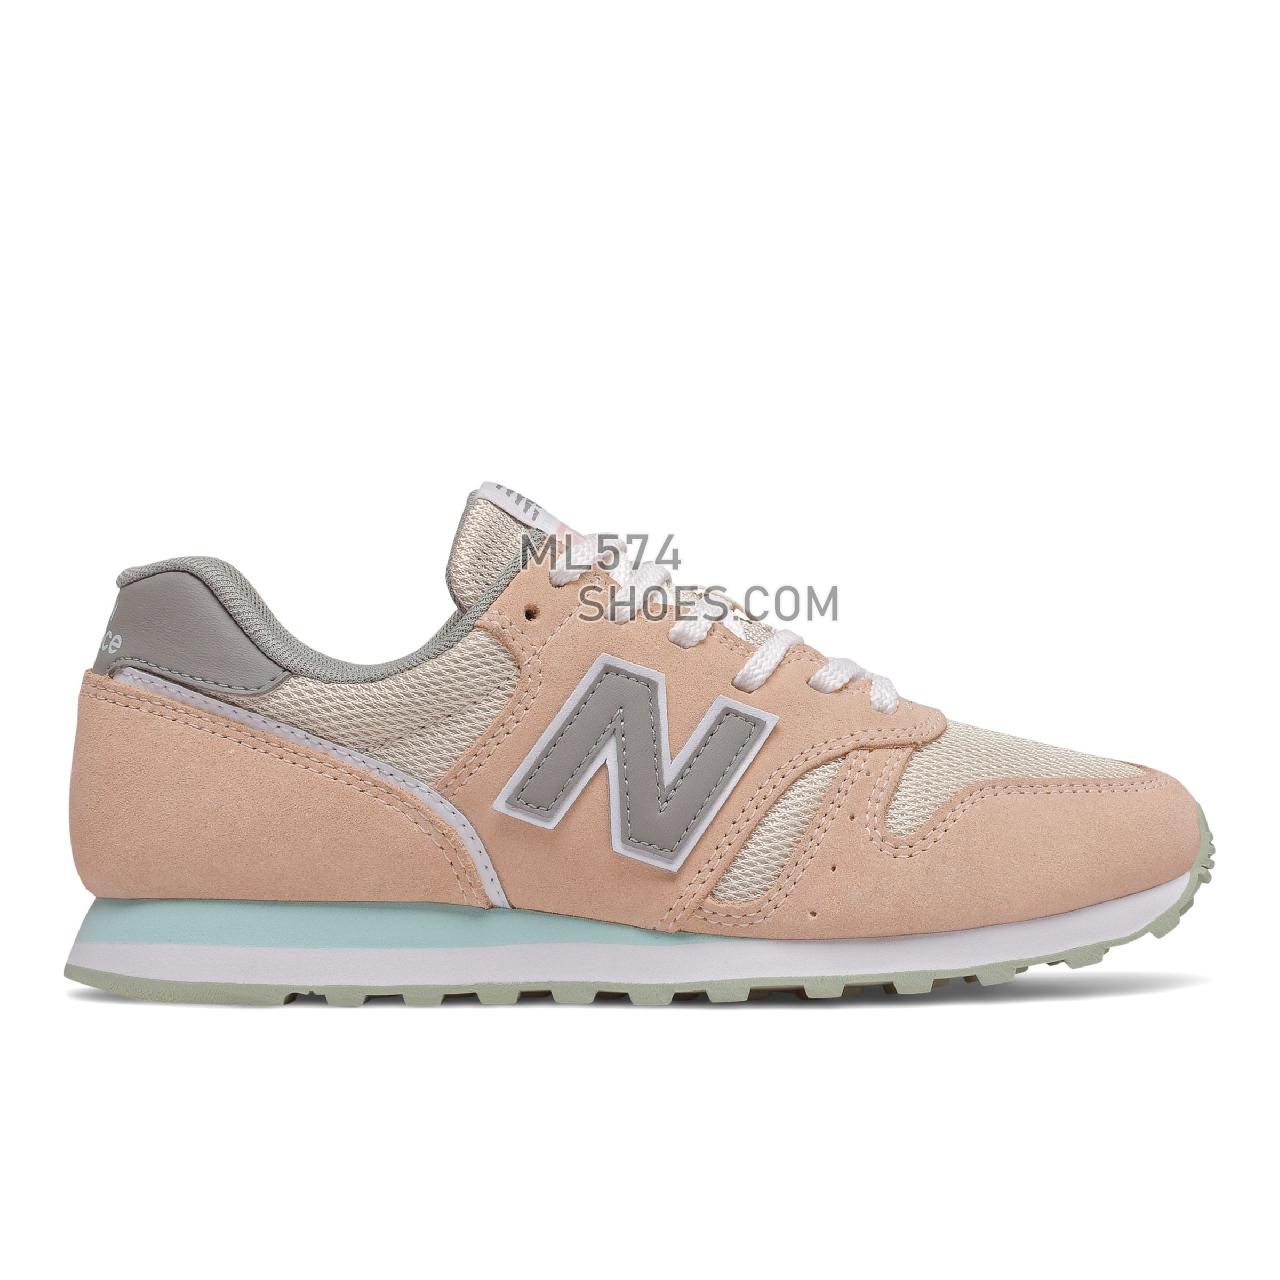 New Balance WL373 - Women's Classic Sneakers - Rose Water with White Mint - WL373CP2